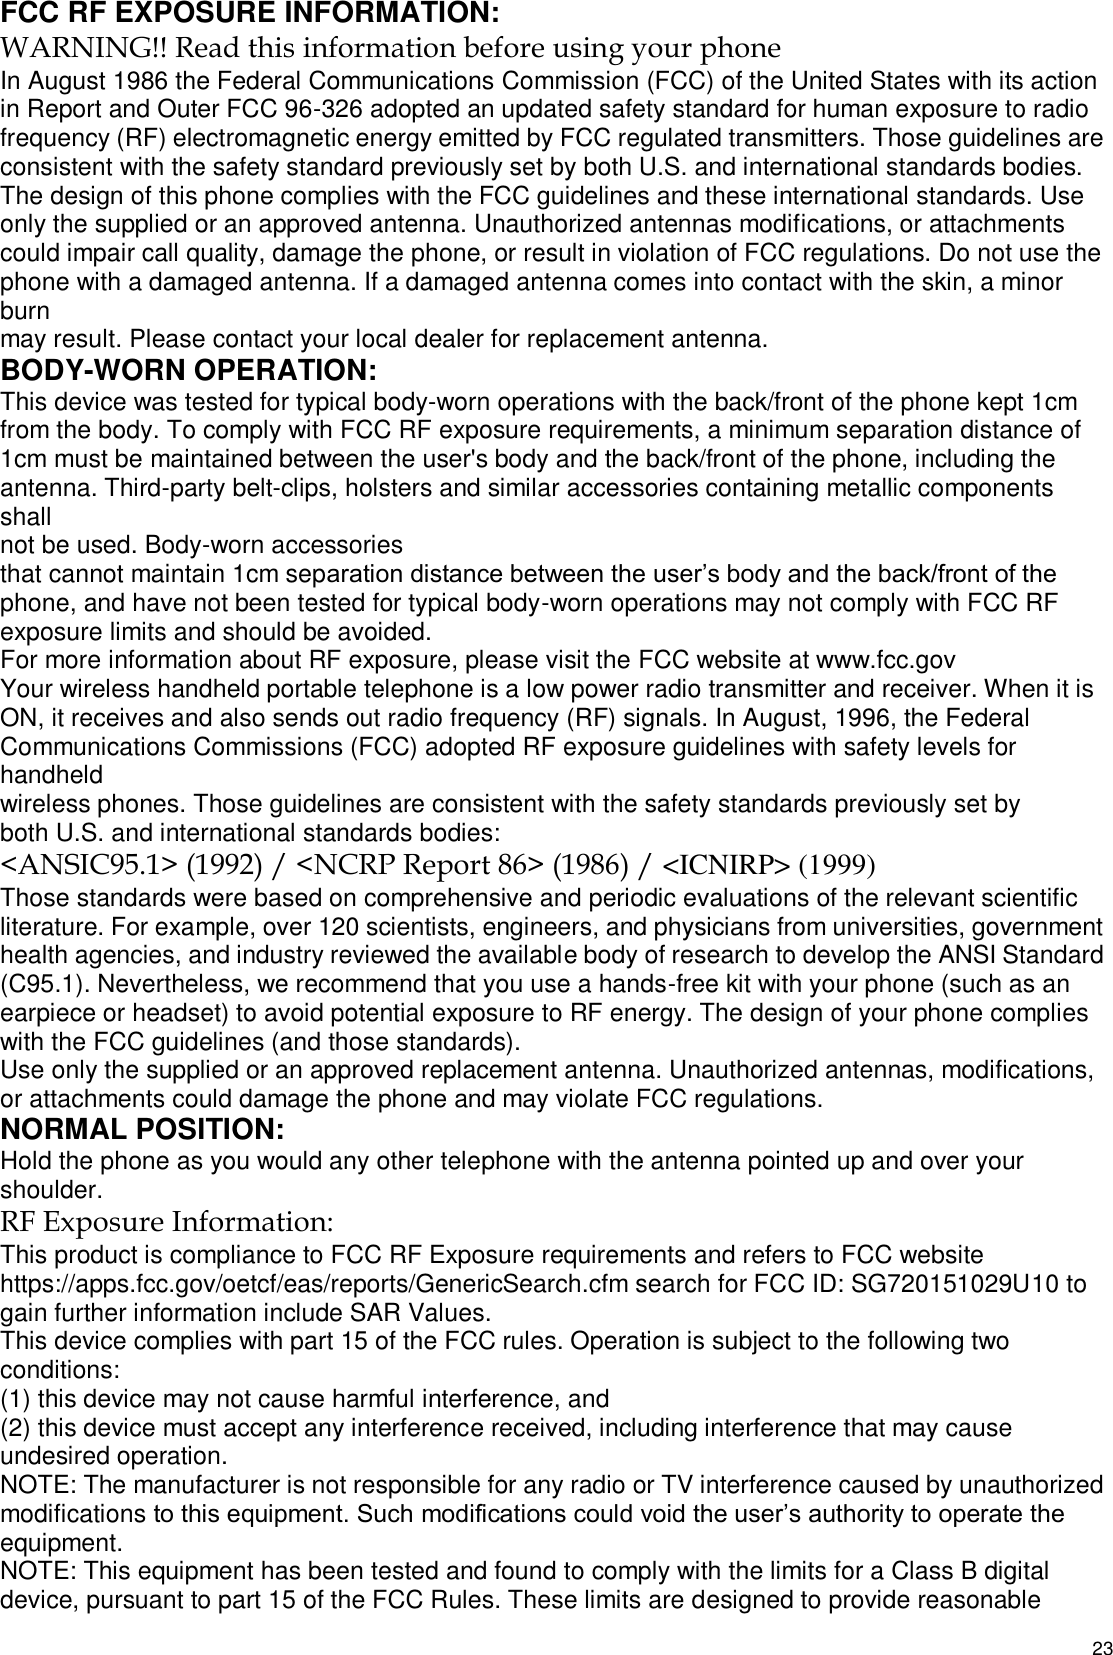   23 FCC RF EXPOSURE INFORMATION: WARNING!! Read this information before using your phone In August 1986 the Federal Communications Commission (FCC) of the United States with its action in Report and Outer FCC 96-326 adopted an updated safety standard for human exposure to radio frequency (RF) electromagnetic energy emitted by FCC regulated transmitters. Those guidelines are consistent with the safety standard previously set by both U.S. and international standards bodies. The design of this phone complies with the FCC guidelines and these international standards. Use only the supplied or an approved antenna. Unauthorized antennas modifications, or attachments could impair call quality, damage the phone, or result in violation of FCC regulations. Do not use the phone with a damaged antenna. If a damaged antenna comes into contact with the skin, a minor burn may result. Please contact your local dealer for replacement antenna. BODY-WORN OPERATION: This device was tested for typical body-worn operations with the back/front of the phone kept 1cm from the body. To comply with FCC RF exposure requirements, a minimum separation distance of 1cm must be maintained between the user&apos;s body and the back/front of the phone, including the antenna. Third-party belt-clips, holsters and similar accessories containing metallic components shall not be used. Body-worn accessories that cannot maintain 1cm separation distance between the user’s body and the back/front of the phone, and have not been tested for typical body-worn operations may not comply with FCC RF exposure limits and should be avoided. For more information about RF exposure, please visit the FCC website at www.fcc.gov Your wireless handheld portable telephone is a low power radio transmitter and receiver. When it is ON, it receives and also sends out radio frequency (RF) signals. In August, 1996, the Federal Communications Commissions (FCC) adopted RF exposure guidelines with safety levels for handheld wireless phones. Those guidelines are consistent with the safety standards previously set by both U.S. and international standards bodies: &lt;ANSIC95.1&gt; (1992) / &lt;NCRP Report 86&gt; (1986) / &lt;ICNIRP&gt; (1999) Those standards were based on comprehensive and periodic evaluations of the relevant scientific literature. For example, over 120 scientists, engineers, and physicians from universities, government health agencies, and industry reviewed the available body of research to develop the ANSI Standard (C95.1). Nevertheless, we recommend that you use a hands-free kit with your phone (such as an earpiece or headset) to avoid potential exposure to RF energy. The design of your phone complies with the FCC guidelines (and those standards). Use only the supplied or an approved replacement antenna. Unauthorized antennas, modifications, or attachments could damage the phone and may violate FCC regulations. NORMAL POSITION: Hold the phone as you would any other telephone with the antenna pointed up and over your shoulder. RF Exposure Information: This product is compliance to FCC RF Exposure requirements and refers to FCC website https://apps.fcc.gov/oetcf/eas/reports/GenericSearch.cfm search for FCC ID: SG720151029U10 to gain further information include SAR Values. This device complies with part 15 of the FCC rules. Operation is subject to the following two conditions: (1) this device may not cause harmful interference, and (2) this device must accept any interference received, including interference that may cause undesired operation. NOTE: The manufacturer is not responsible for any radio or TV interference caused by unauthorized modifications to this equipment. Such modifications could void the user’s authority to operate the equipment. NOTE: This equipment has been tested and found to comply with the limits for a Class B digital device, pursuant to part 15 of the FCC Rules. These limits are designed to provide reasonable 